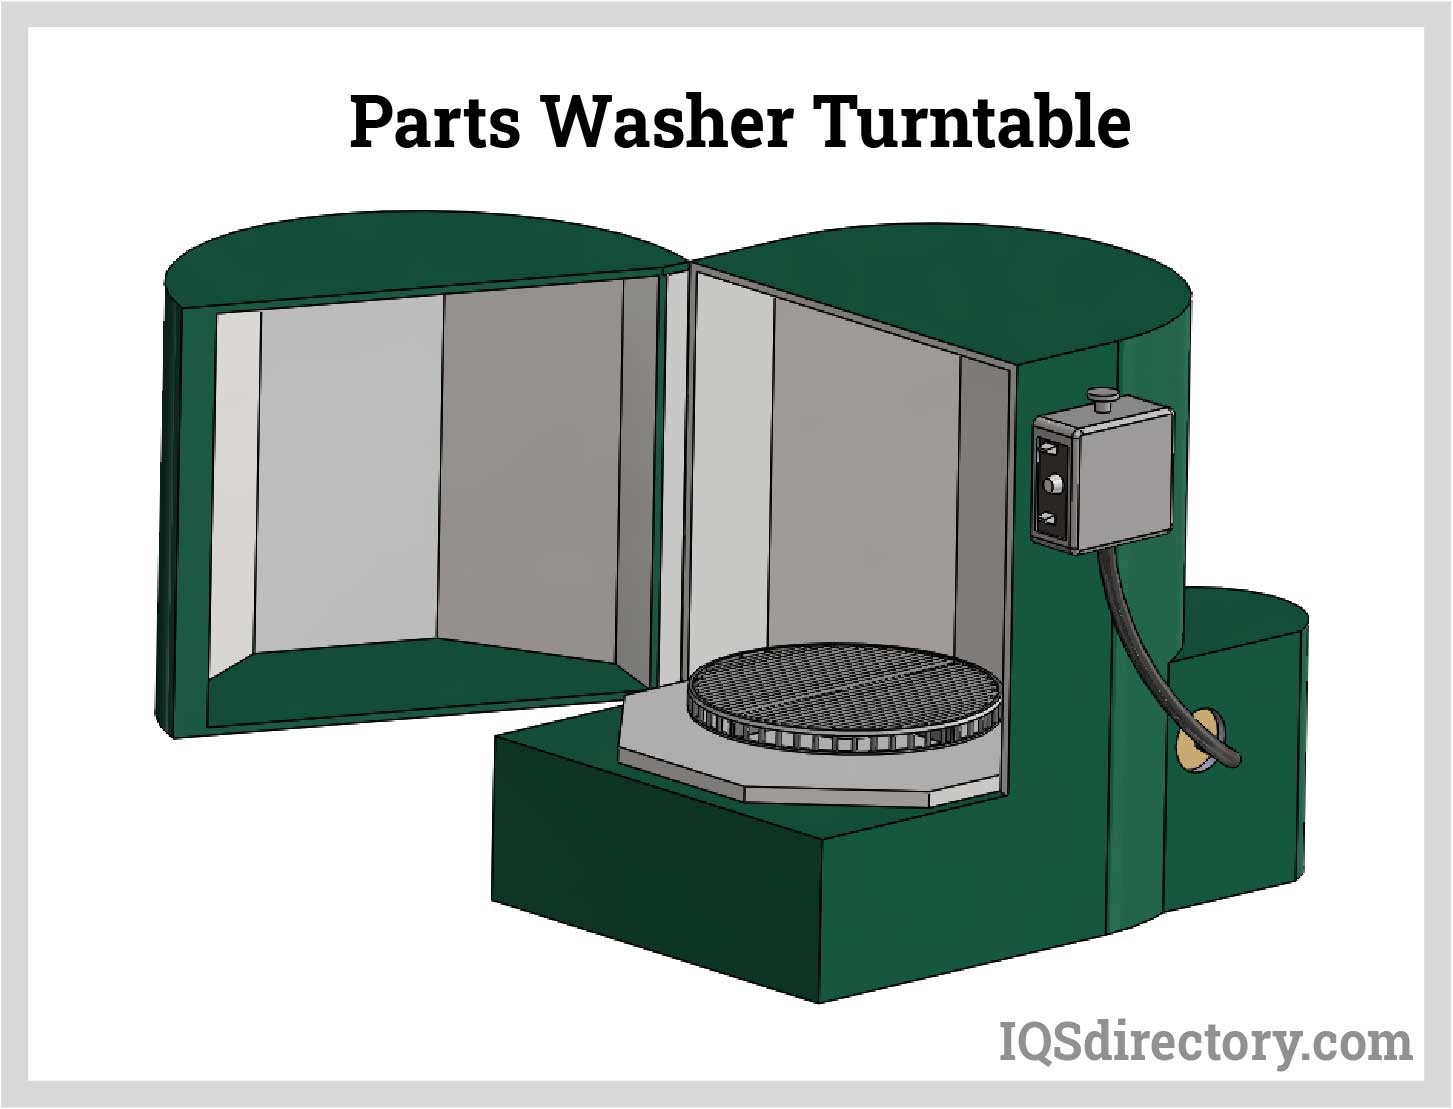 Parts Washer Turntable